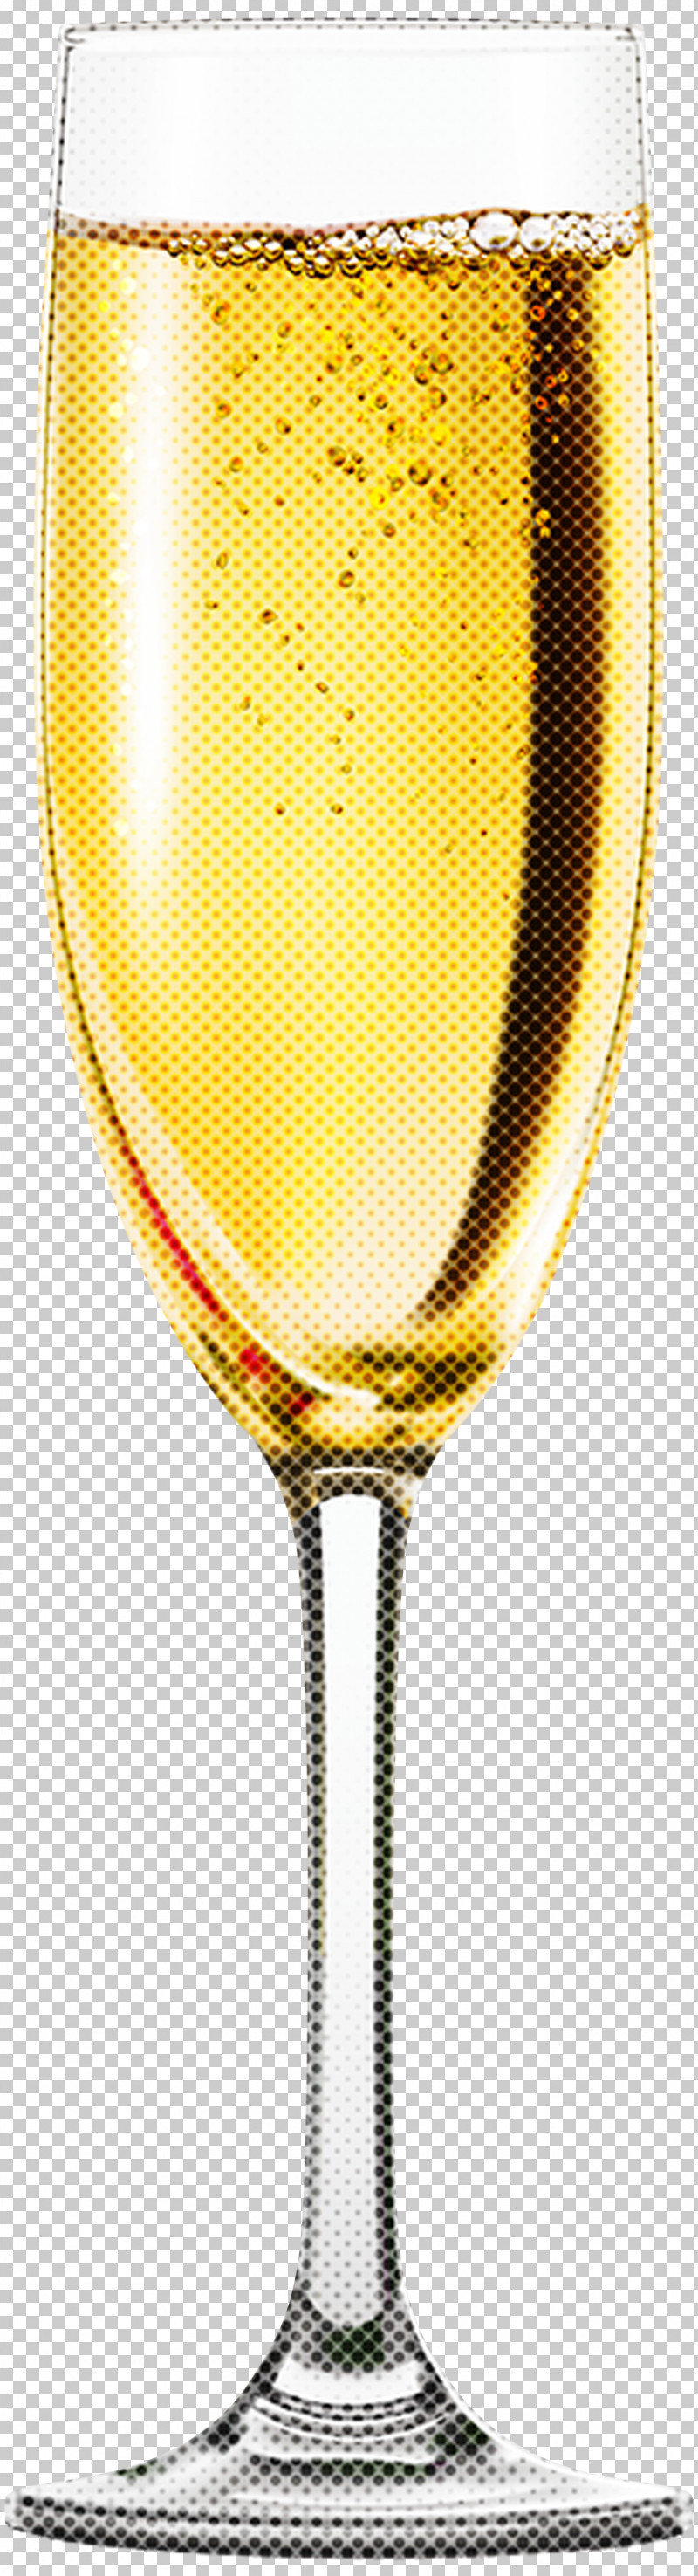 Champagne Stemware Drinkware Stemware Glass Yellow PNG, Clipart, Champagne Cocktail, Champagne Stemware, Drink, Drinkware, Glass Free PNG Download